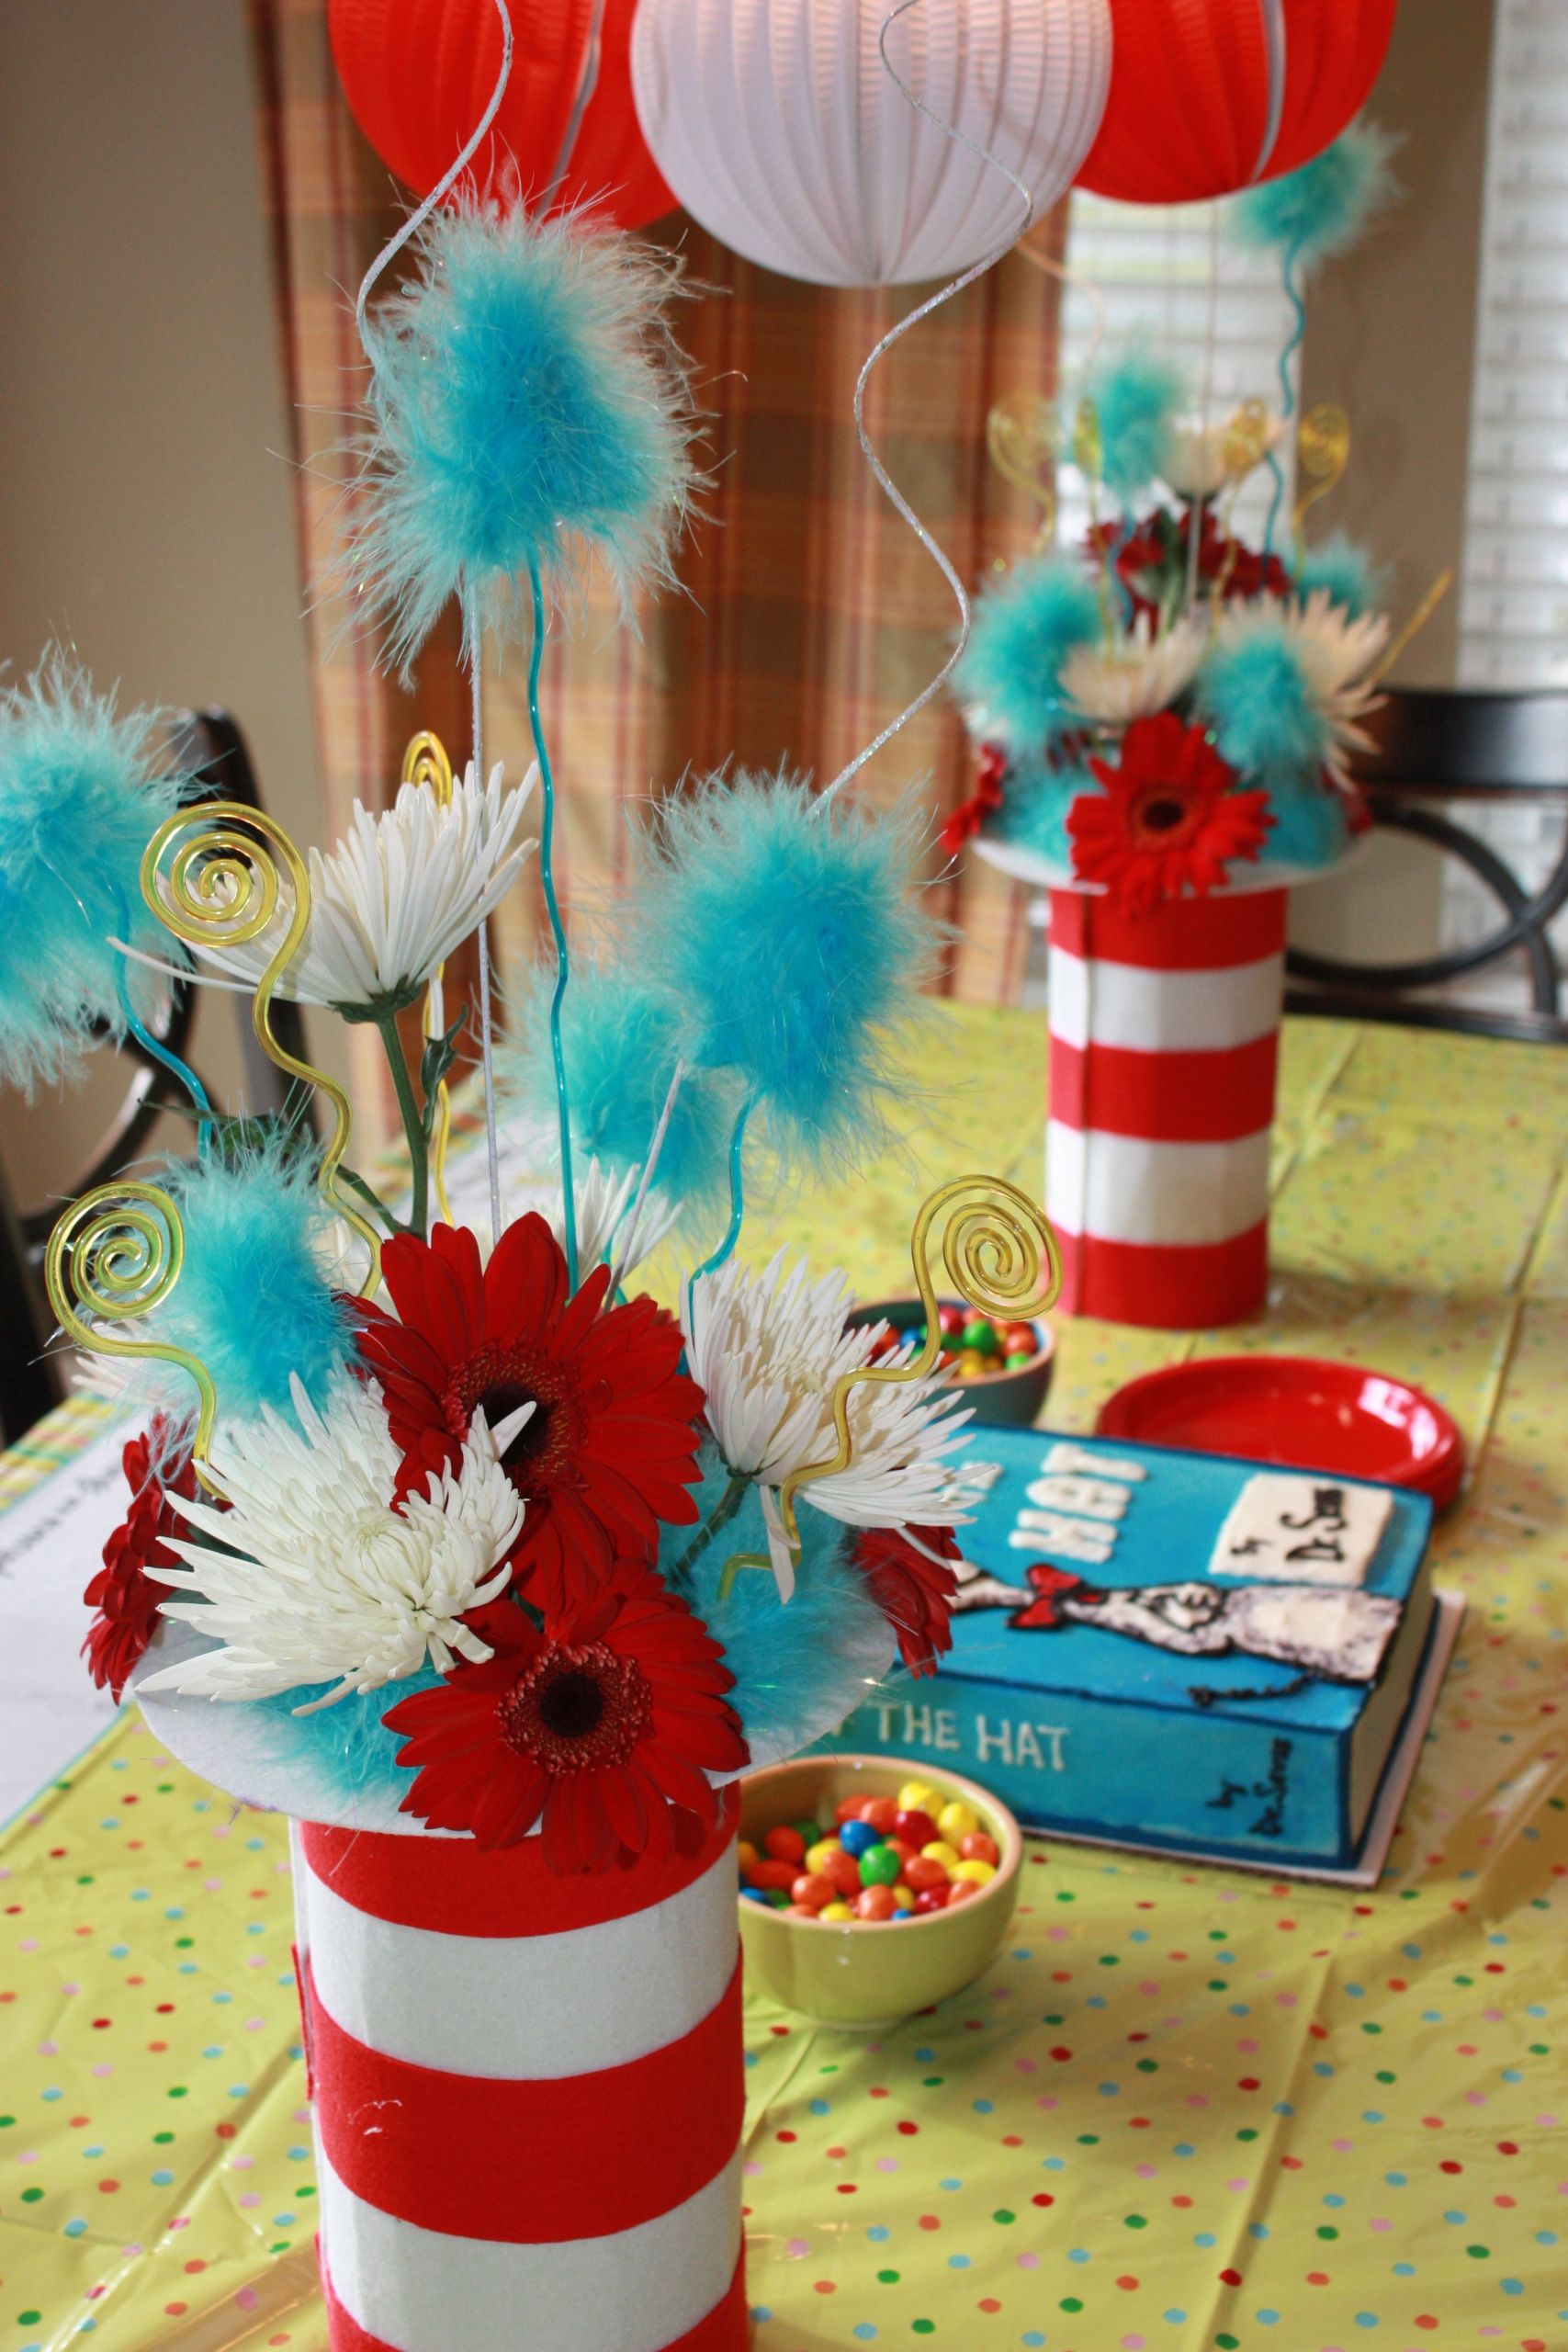 Dr.Seuss Baby Shower Gifts
 Dr Seuss baby shower brittany estes